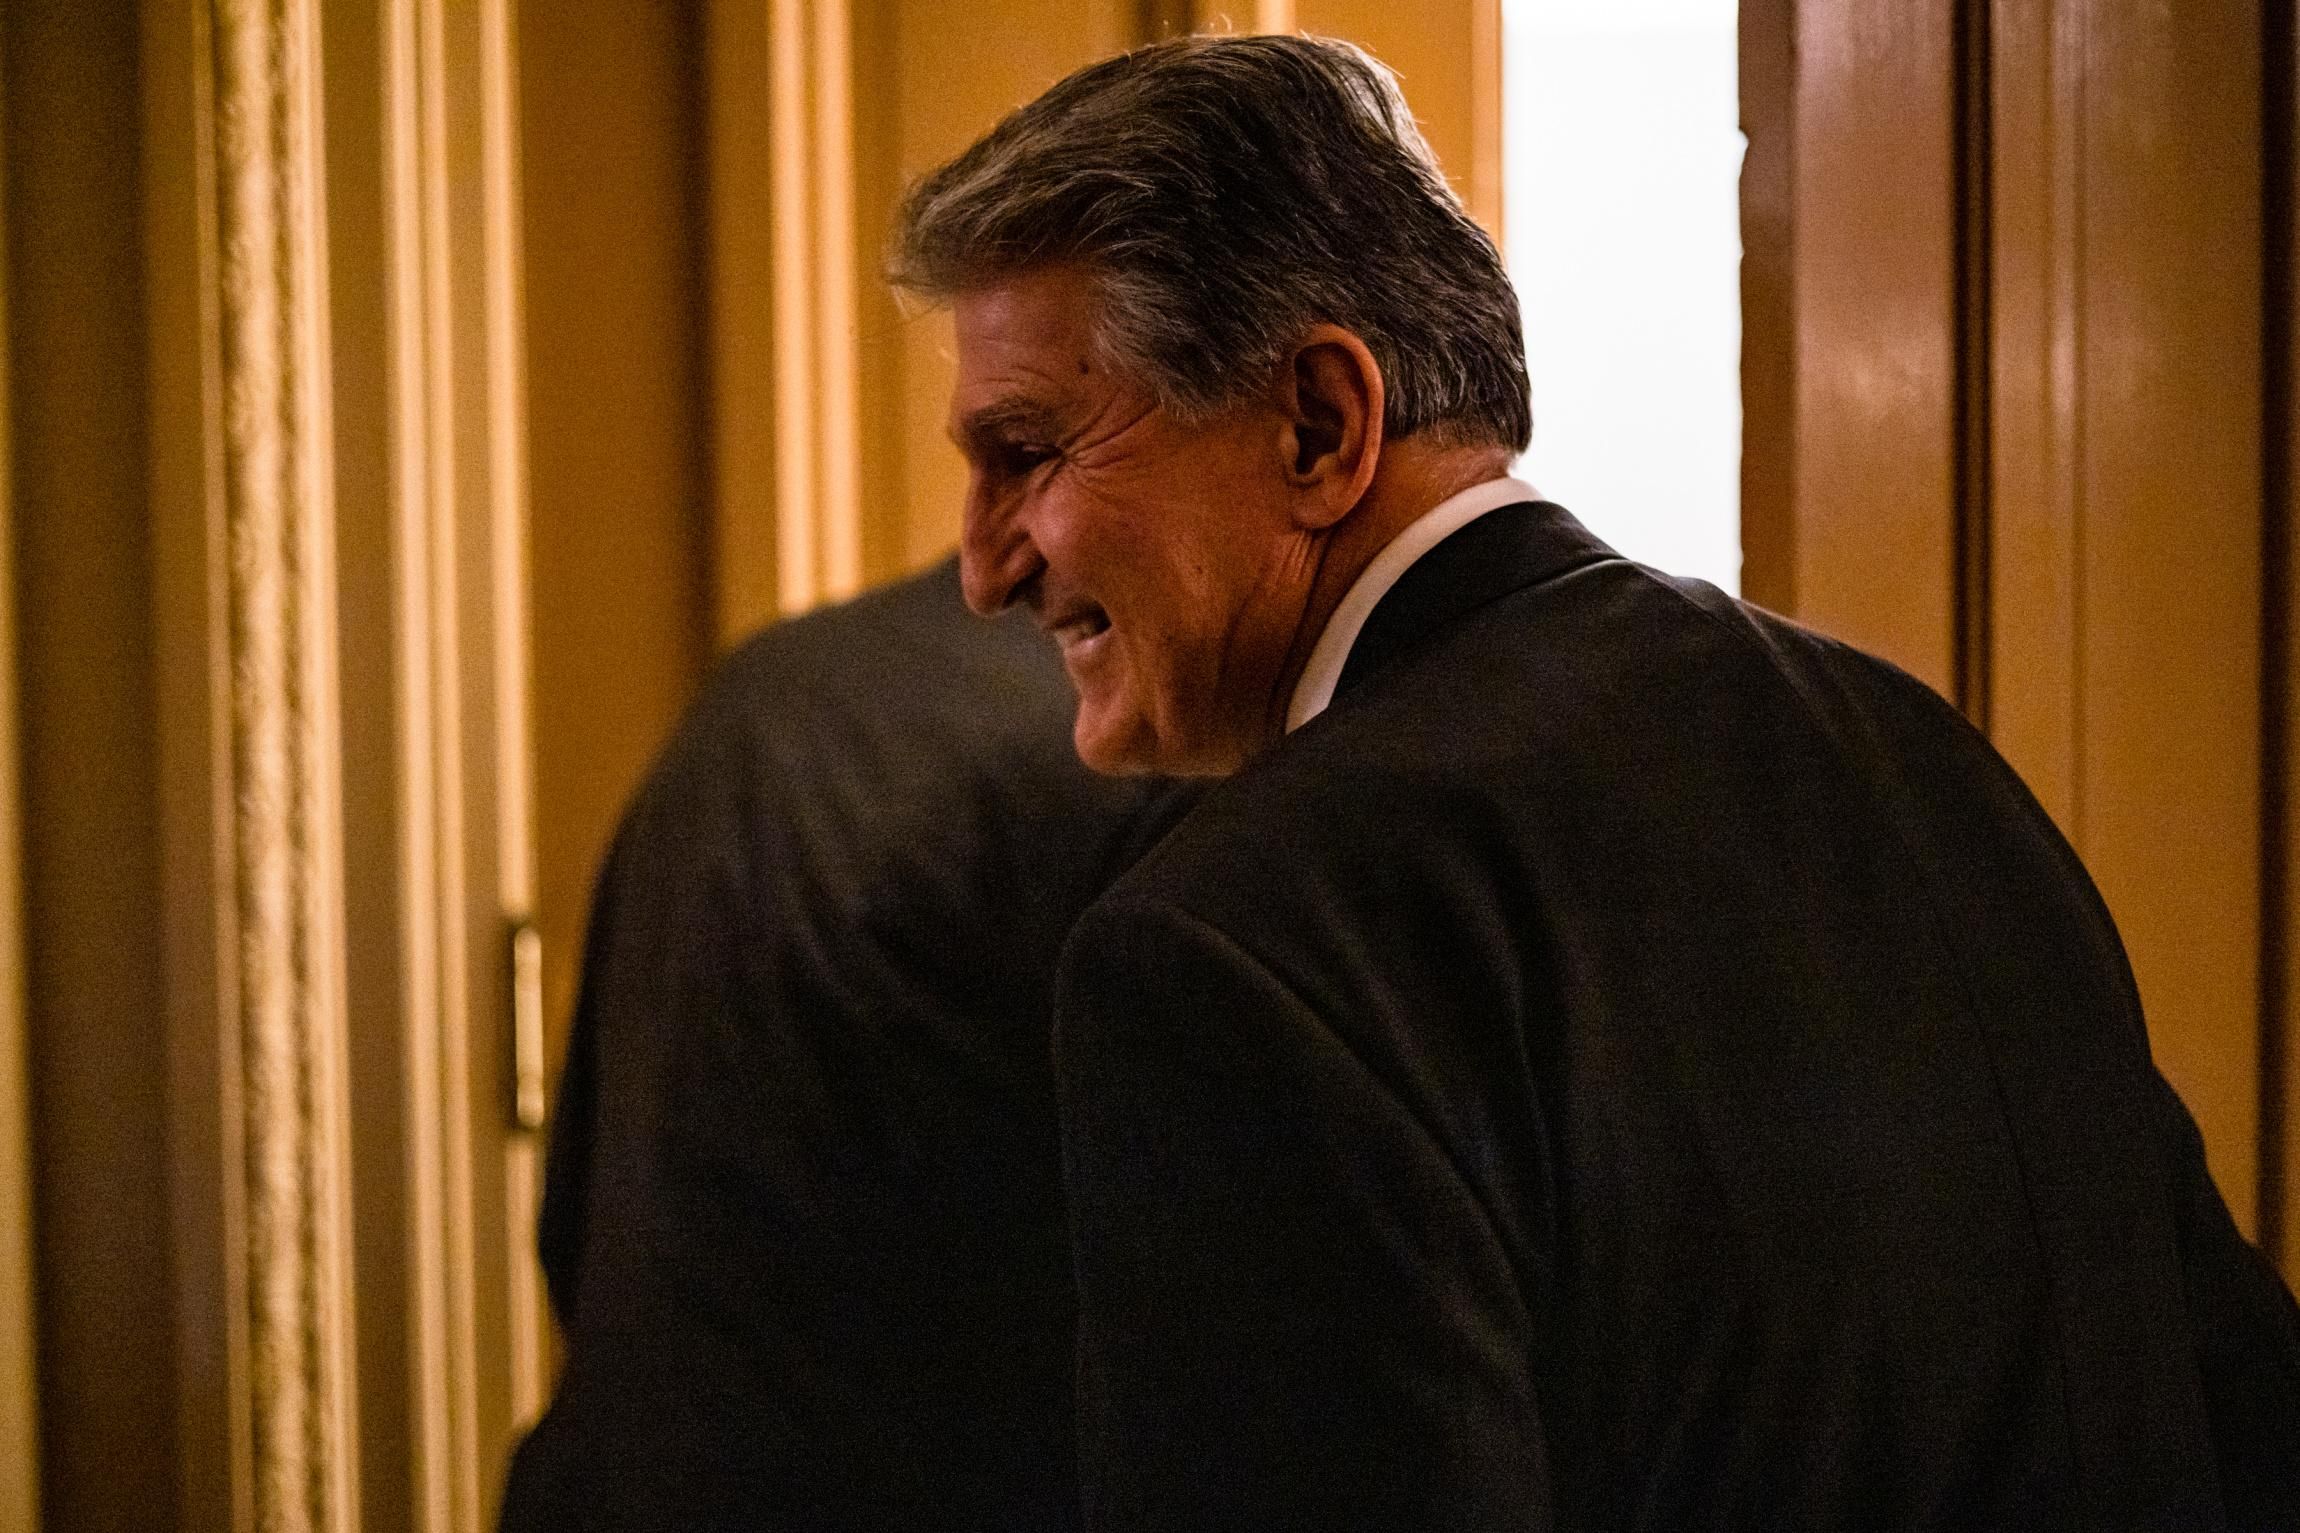 Sen. Joe Manchin (D-W.Va.) returns to the room where a bipartisan group of senators and White House officials are holding negotiations over the Biden administration's proposed infrastructure plan at the U.S. Capitol on June 23, 2021 in Washington, D.C. (Photo: Samuel Corum via Getty Images)